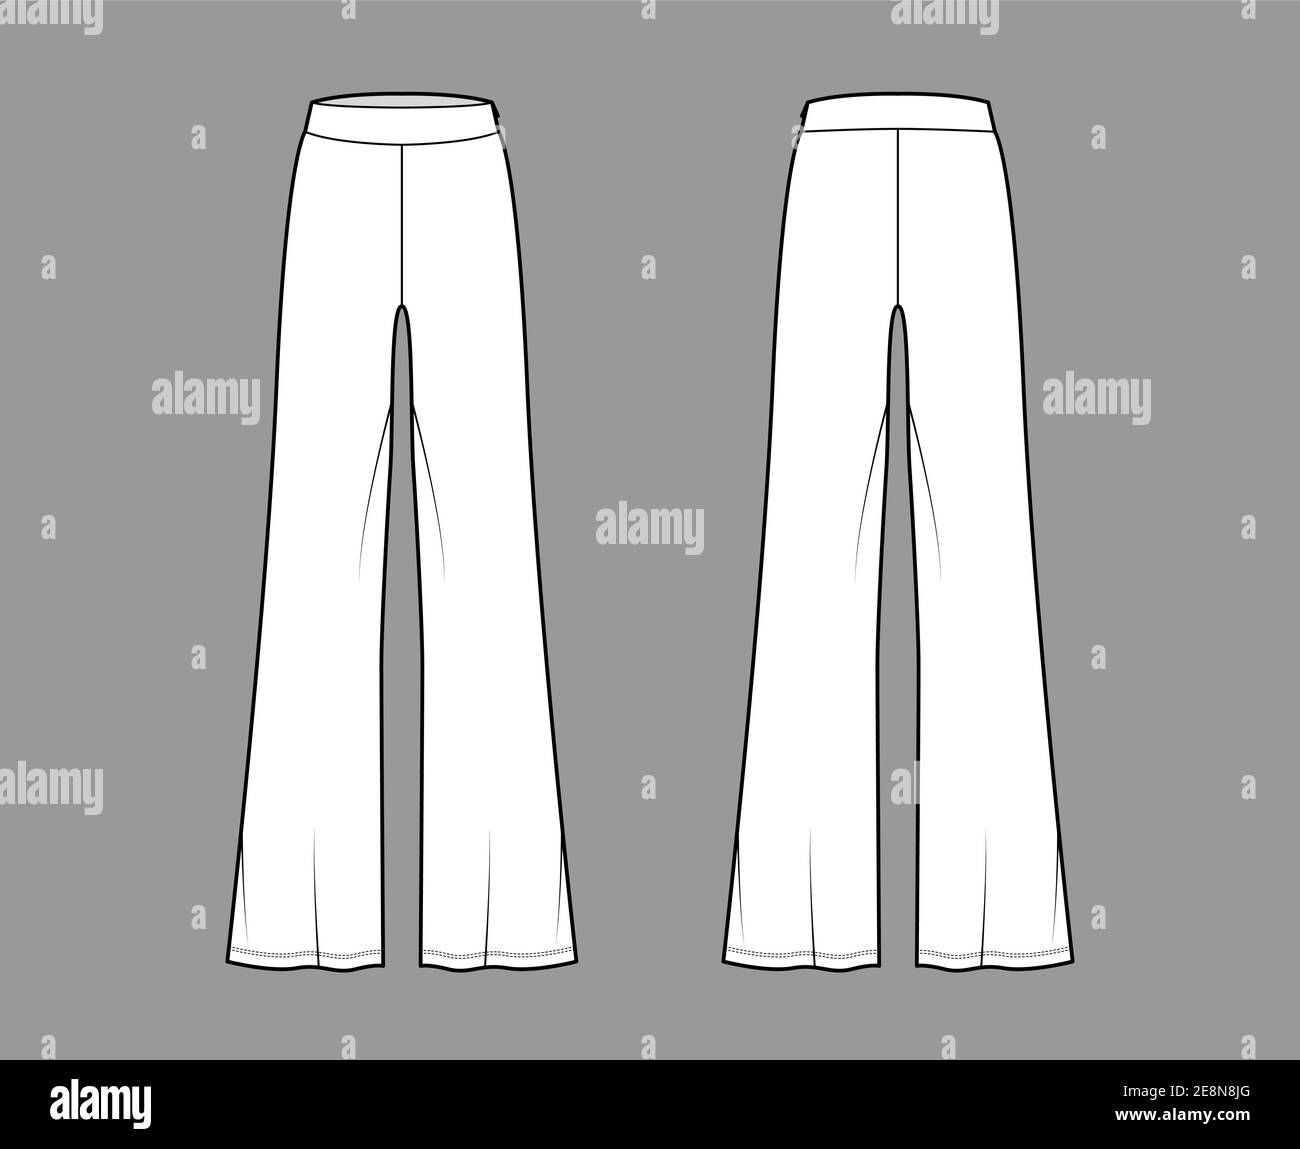 Pants boot cut technical fashion illustration with floor length, oversize silhouette, side zipper. Flat sport pyjama bottom template front, back, white color style. Women, men, unisex CAD mockup Stock Vector